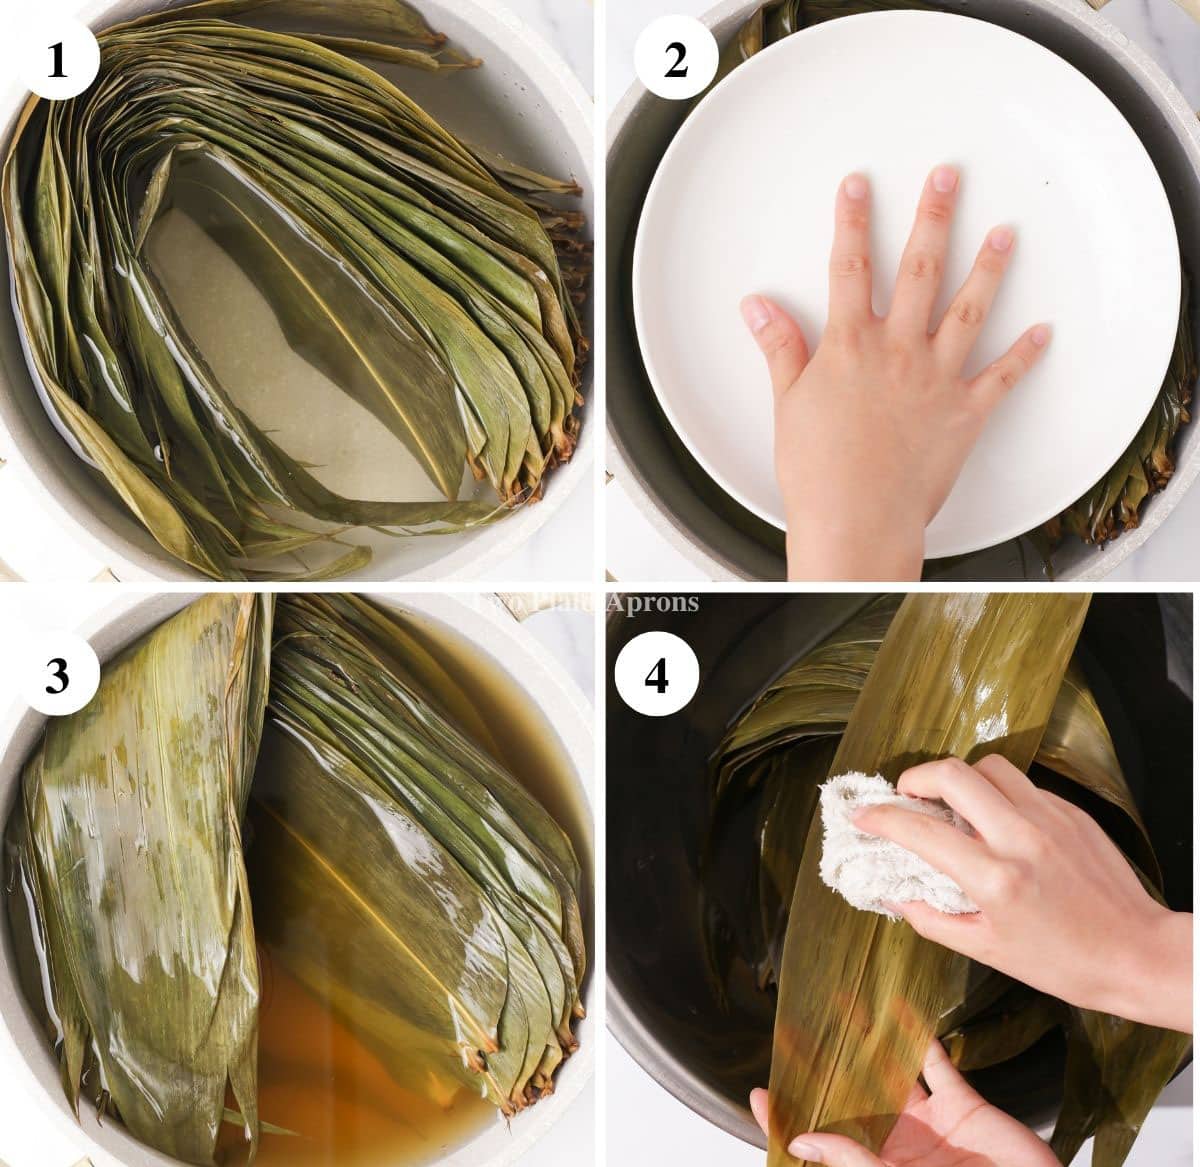 Steps to soak and clean the bamboo leaves for zongzi.